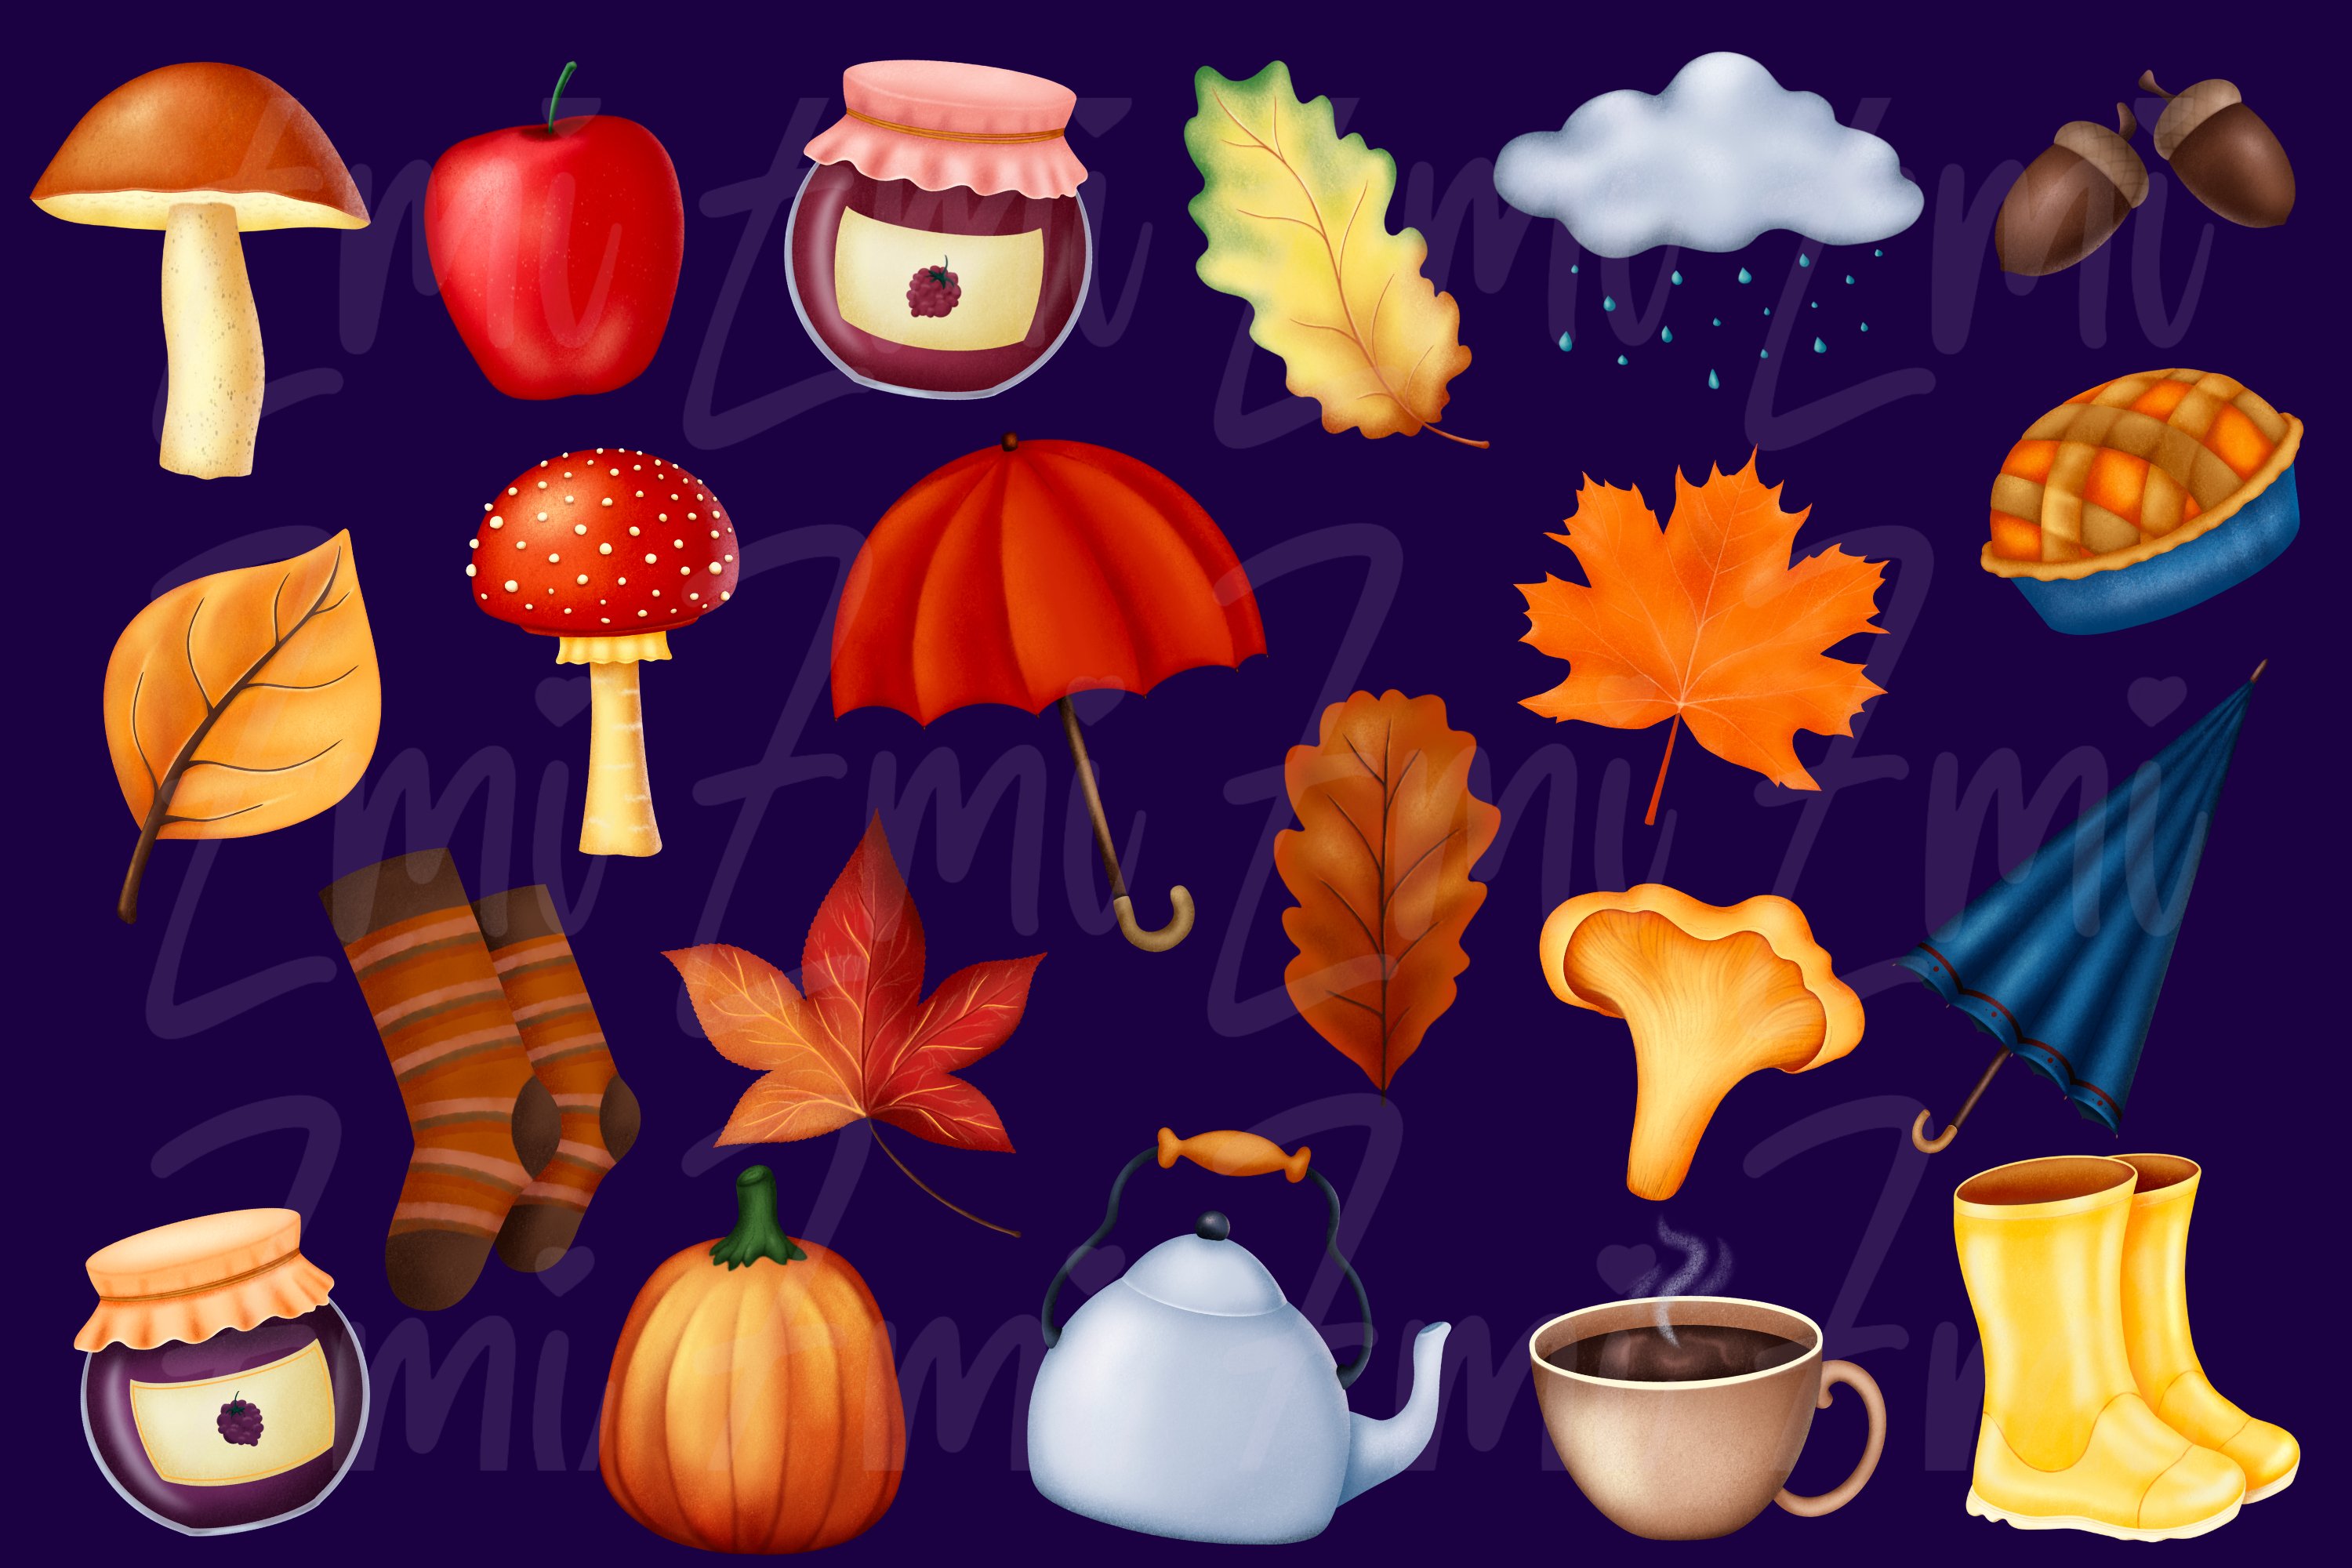 Bundle of different autumn illustrations on a blue background.